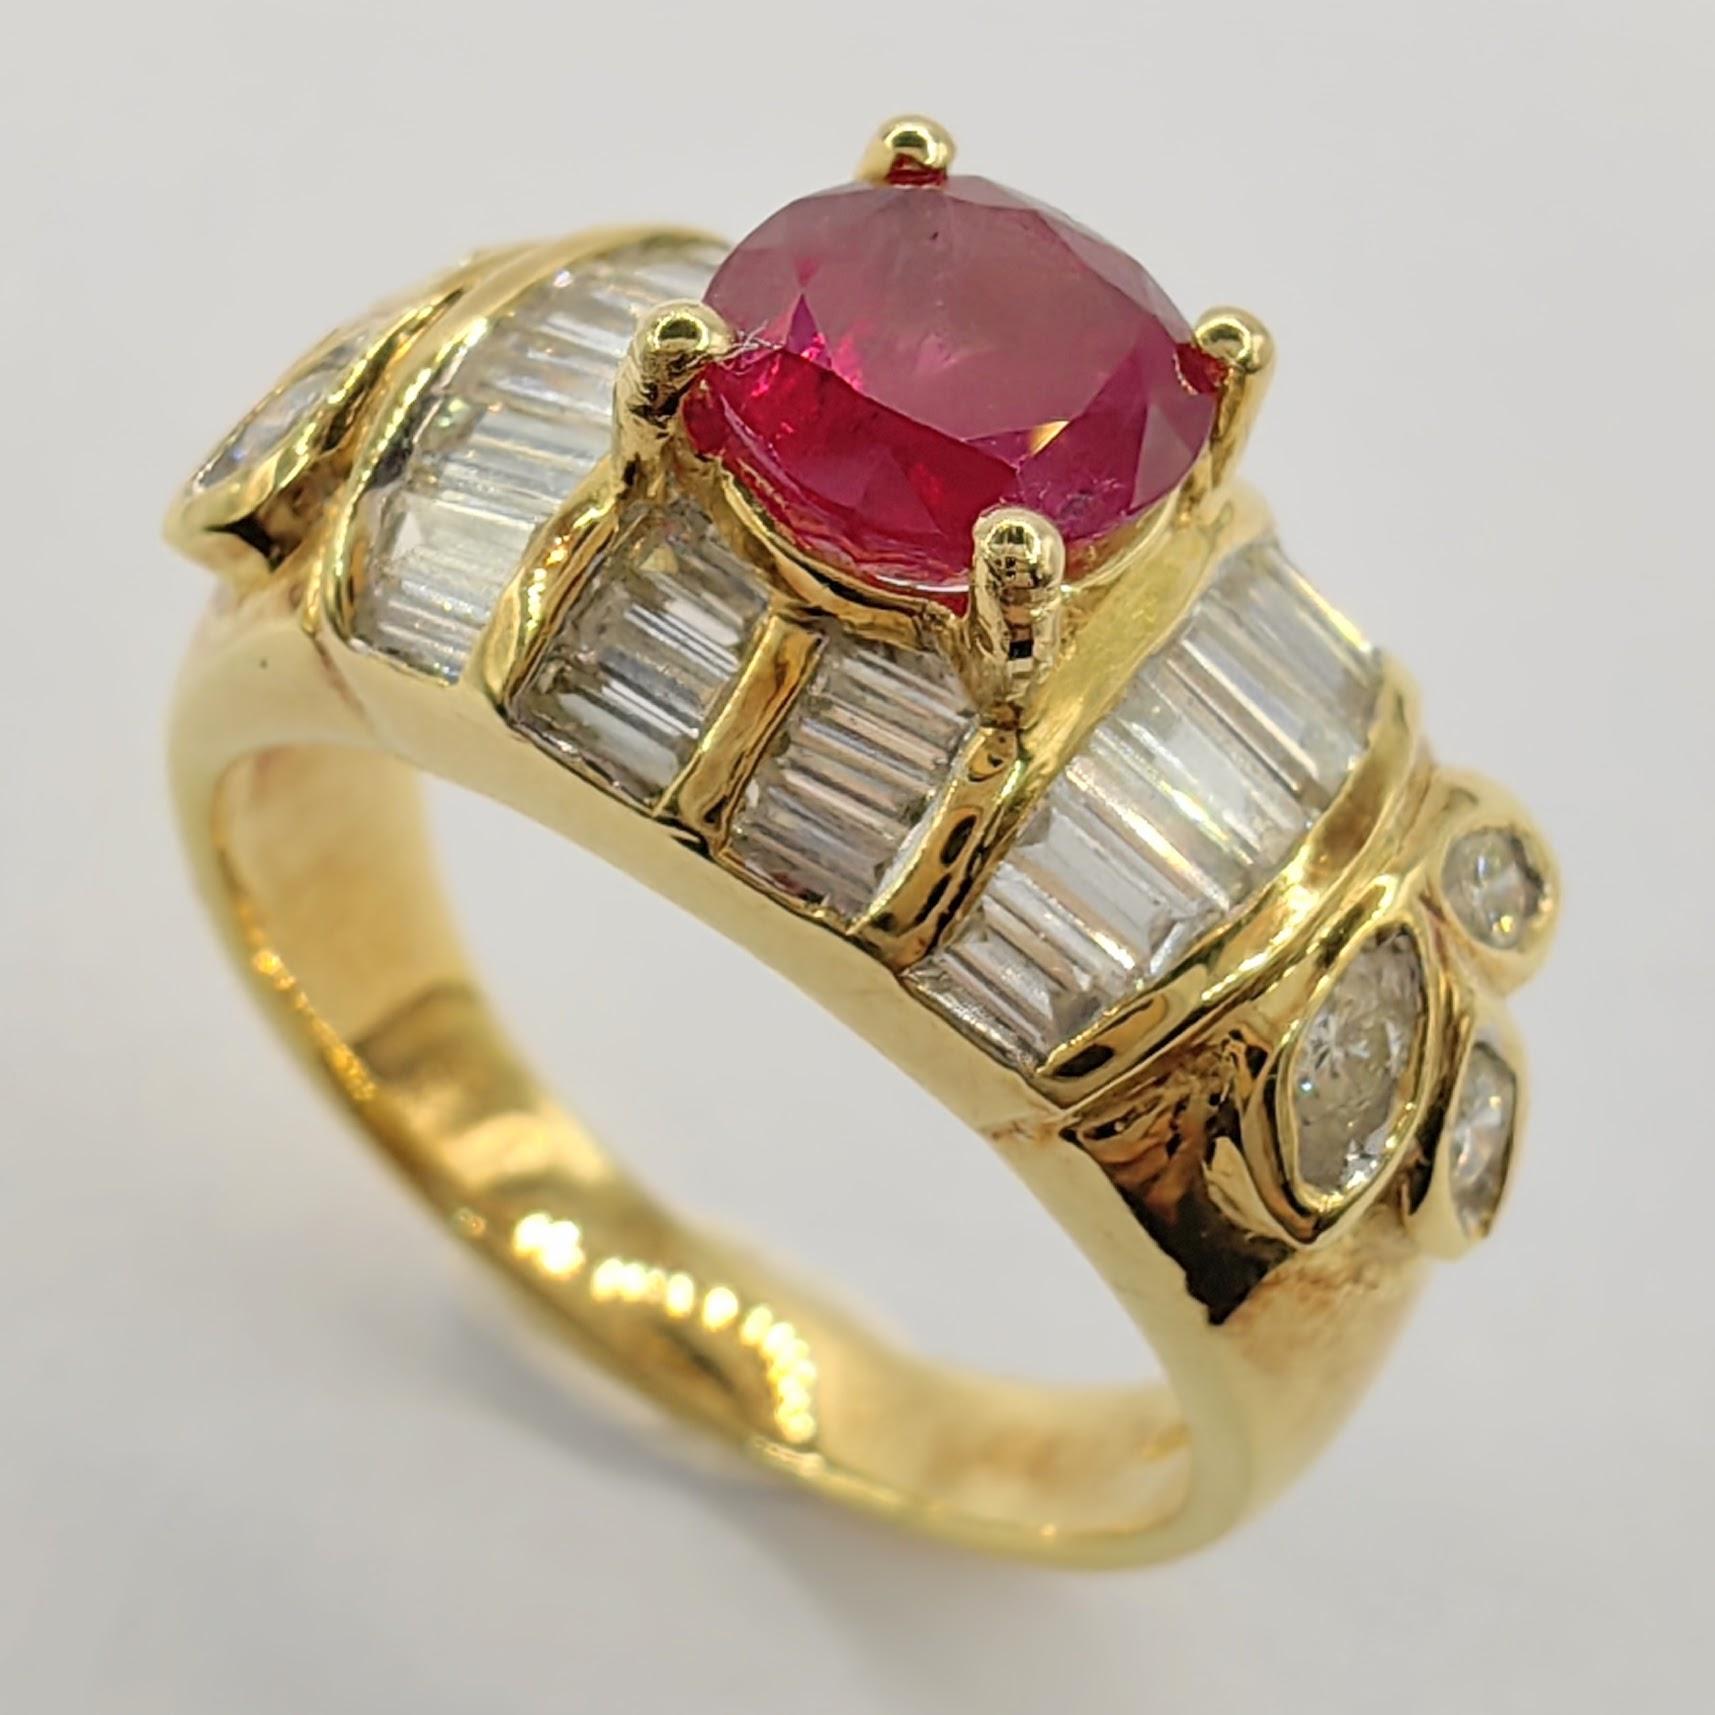 Introducing our Vintage Art Deco Round-cut Ruby Tapered Baguette Diamond Ring in 20K Yellow Gold, a timeless masterpiece that seamlessly blends vintage charm with elegant sophistication.

At the heart of this exquisite ring is a captivating